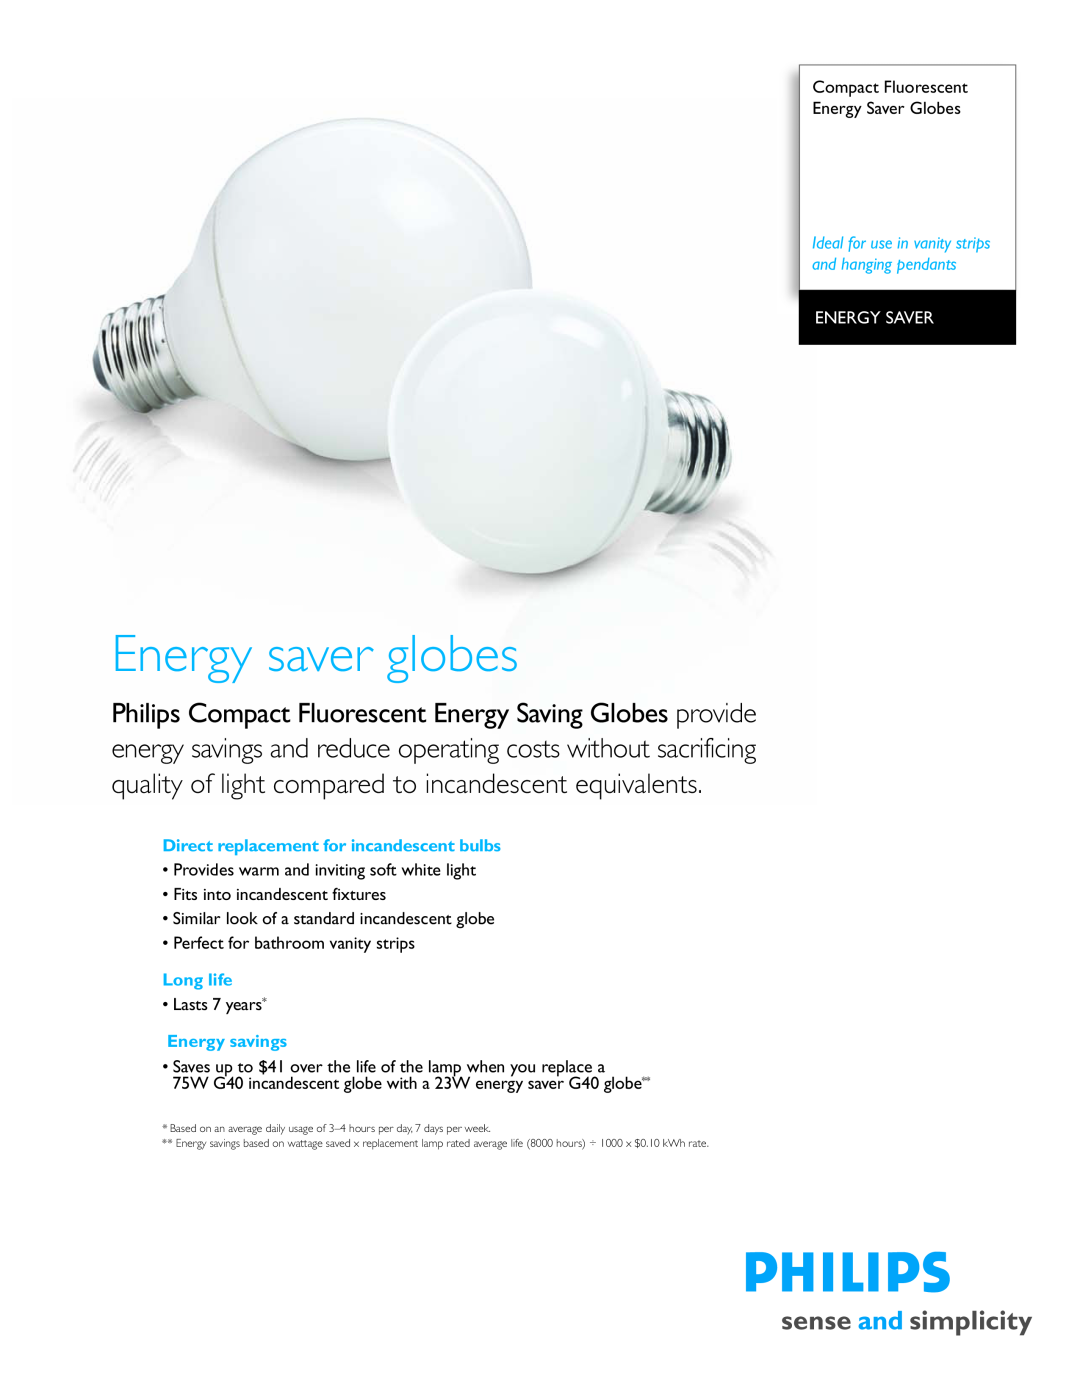 Philips P-8515-B manual Energy saver globes, Energy Saver, Direct replacement for incandescent bulbs, Long life 